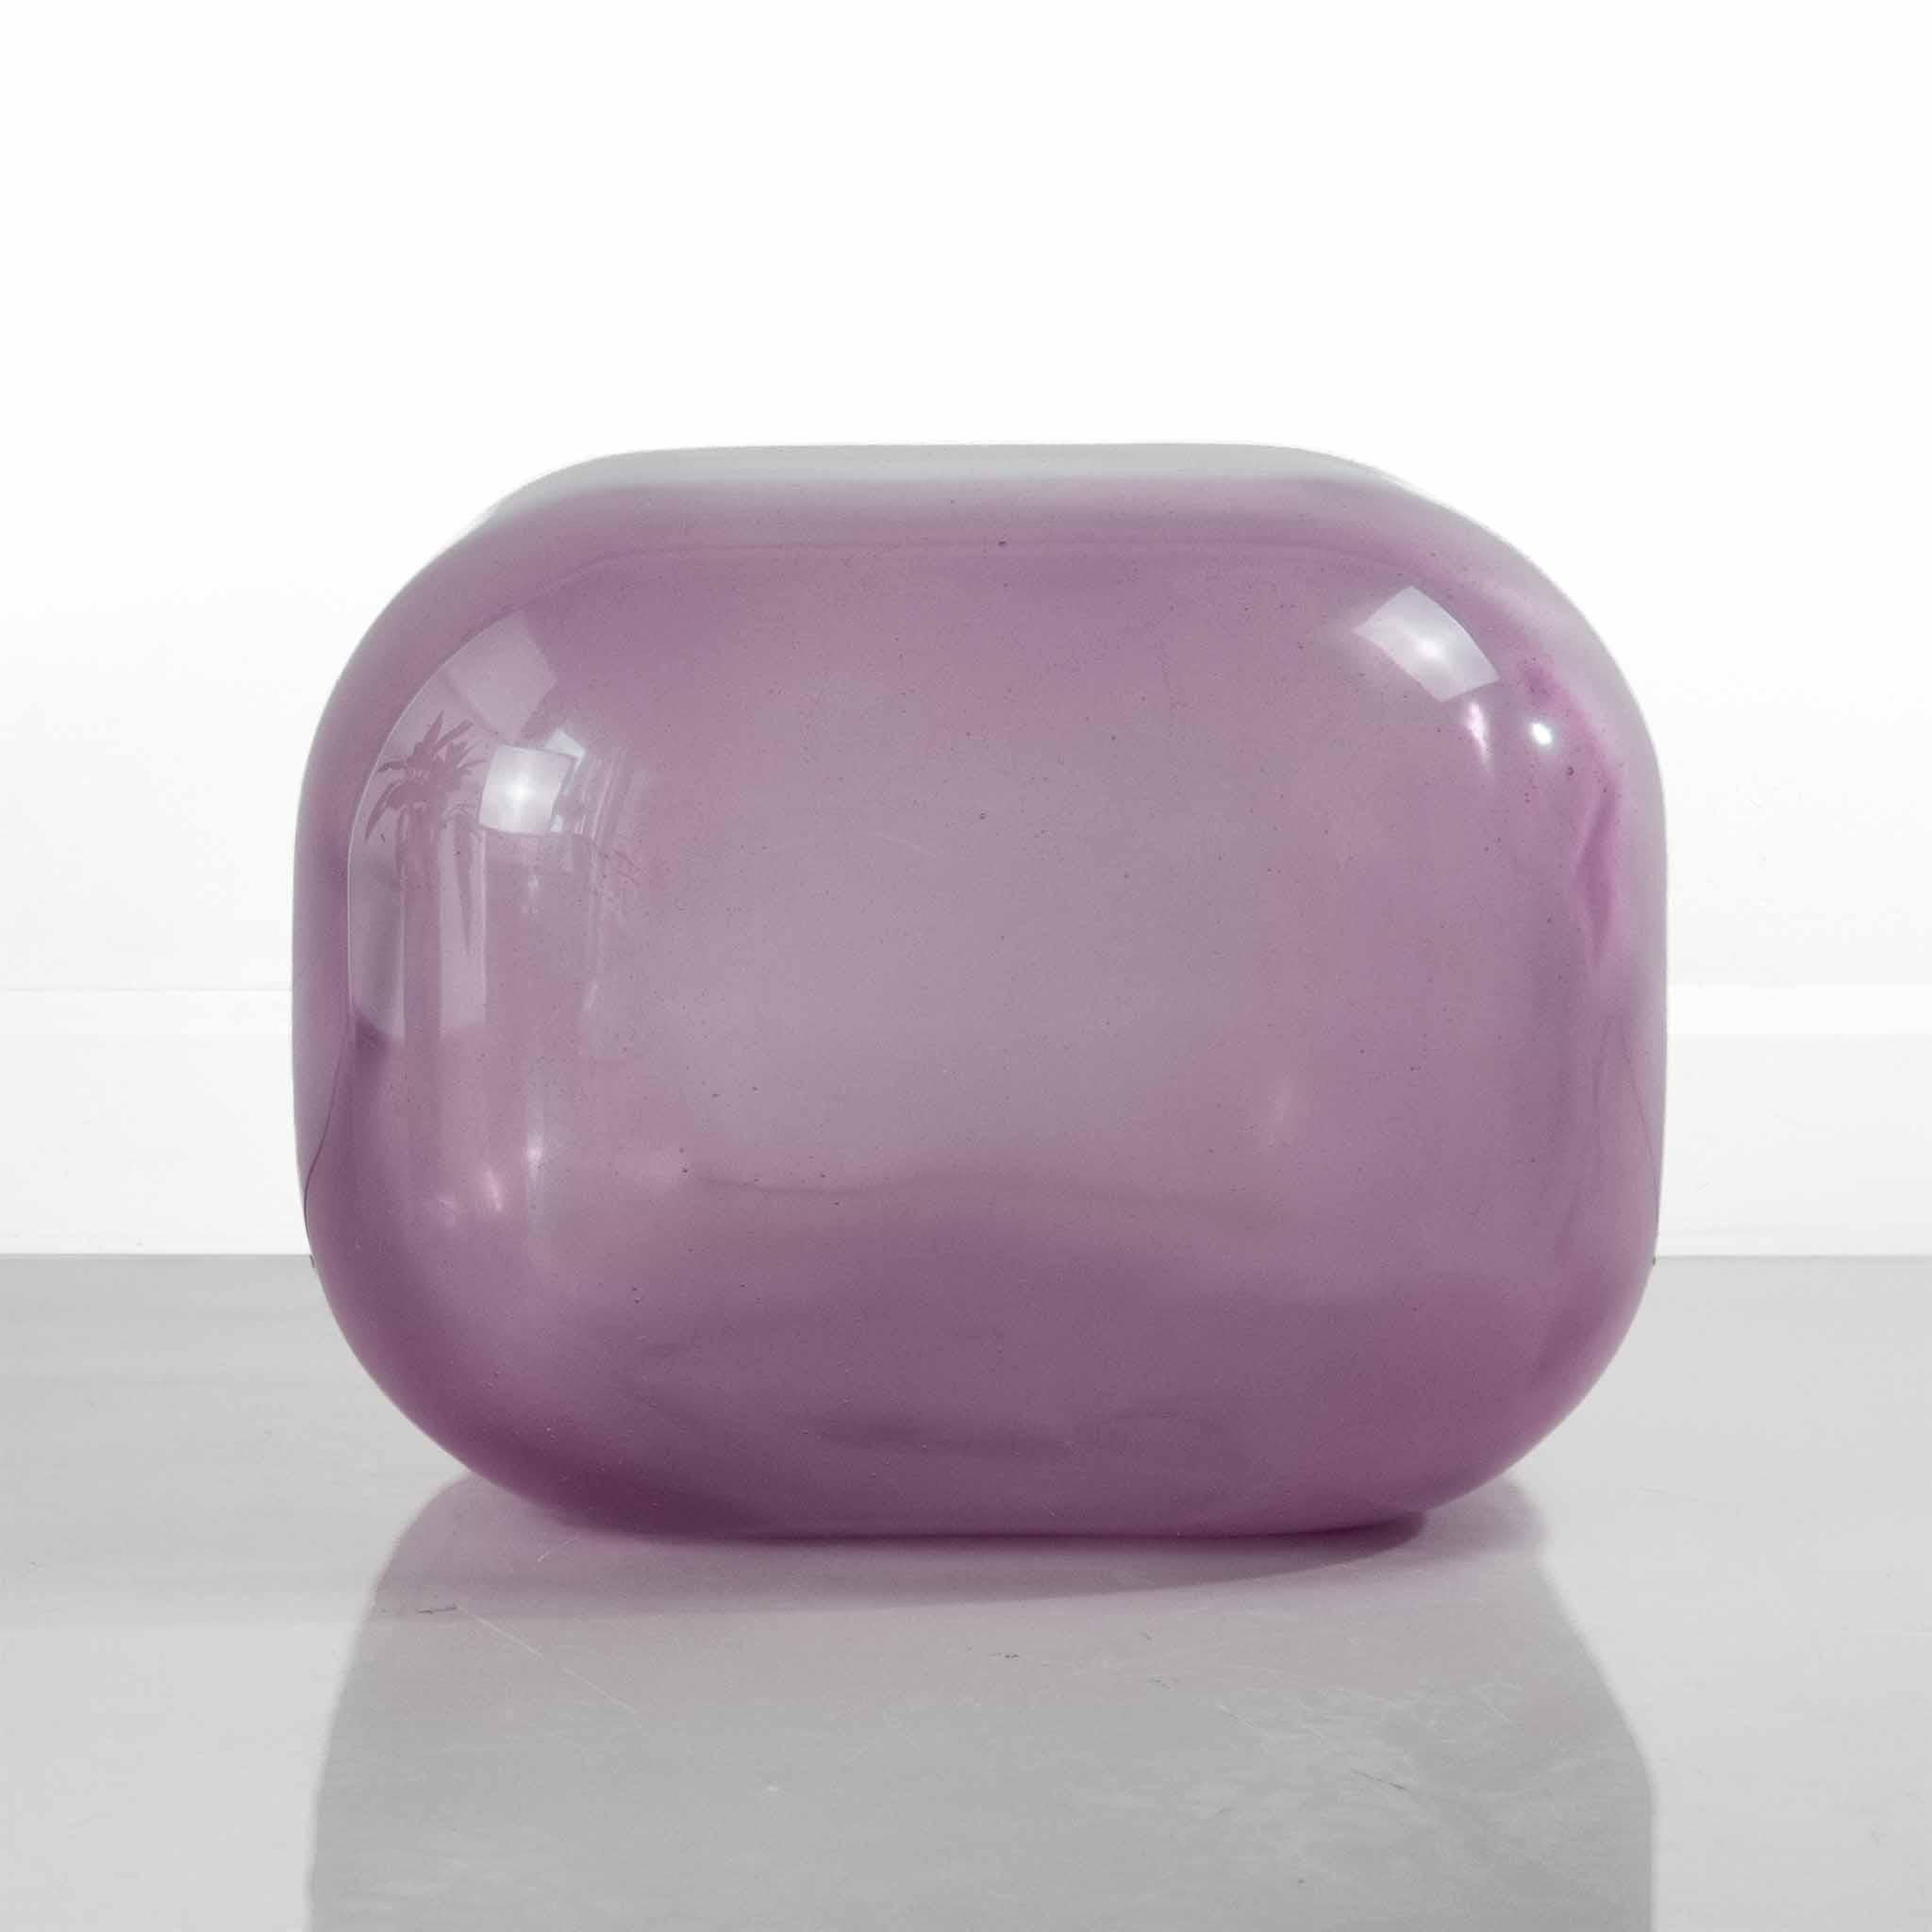 Lilac oort resin side table by Creators Of Objects.
Materials: Resin, pigment
DImensions: W 51 x D 51 x H 40 cm
Also available: Tourmaline, bordeaux, spice, ochre, forest, ocean, twilight, rock, lilac, cerise, coral spice, honey, moss, surf, eve,